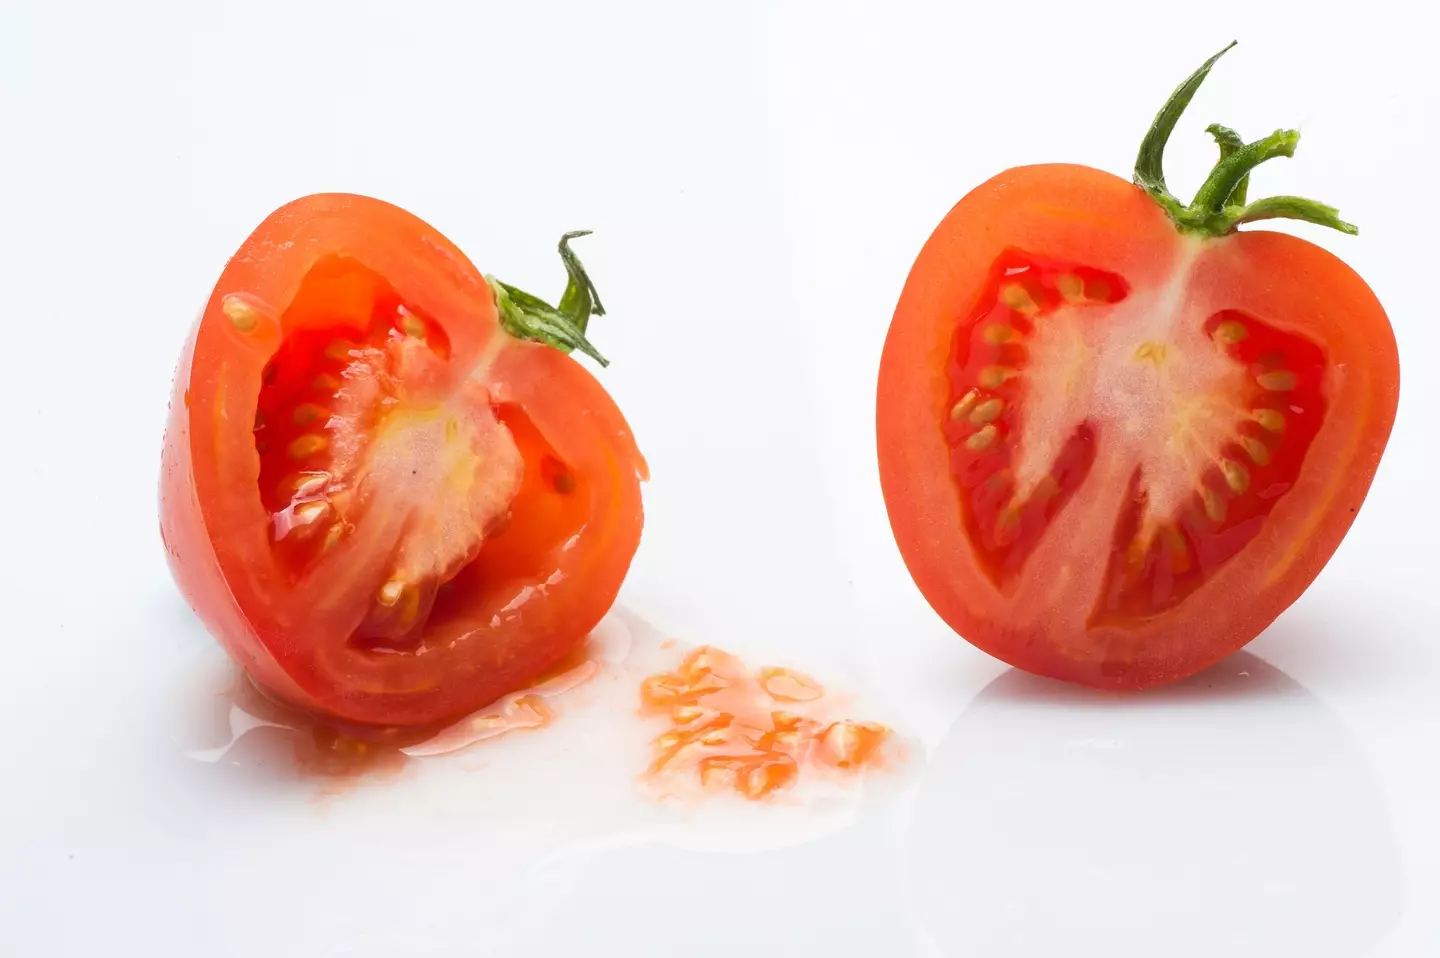 Tomato seeds can pass through the human digestion system intact.